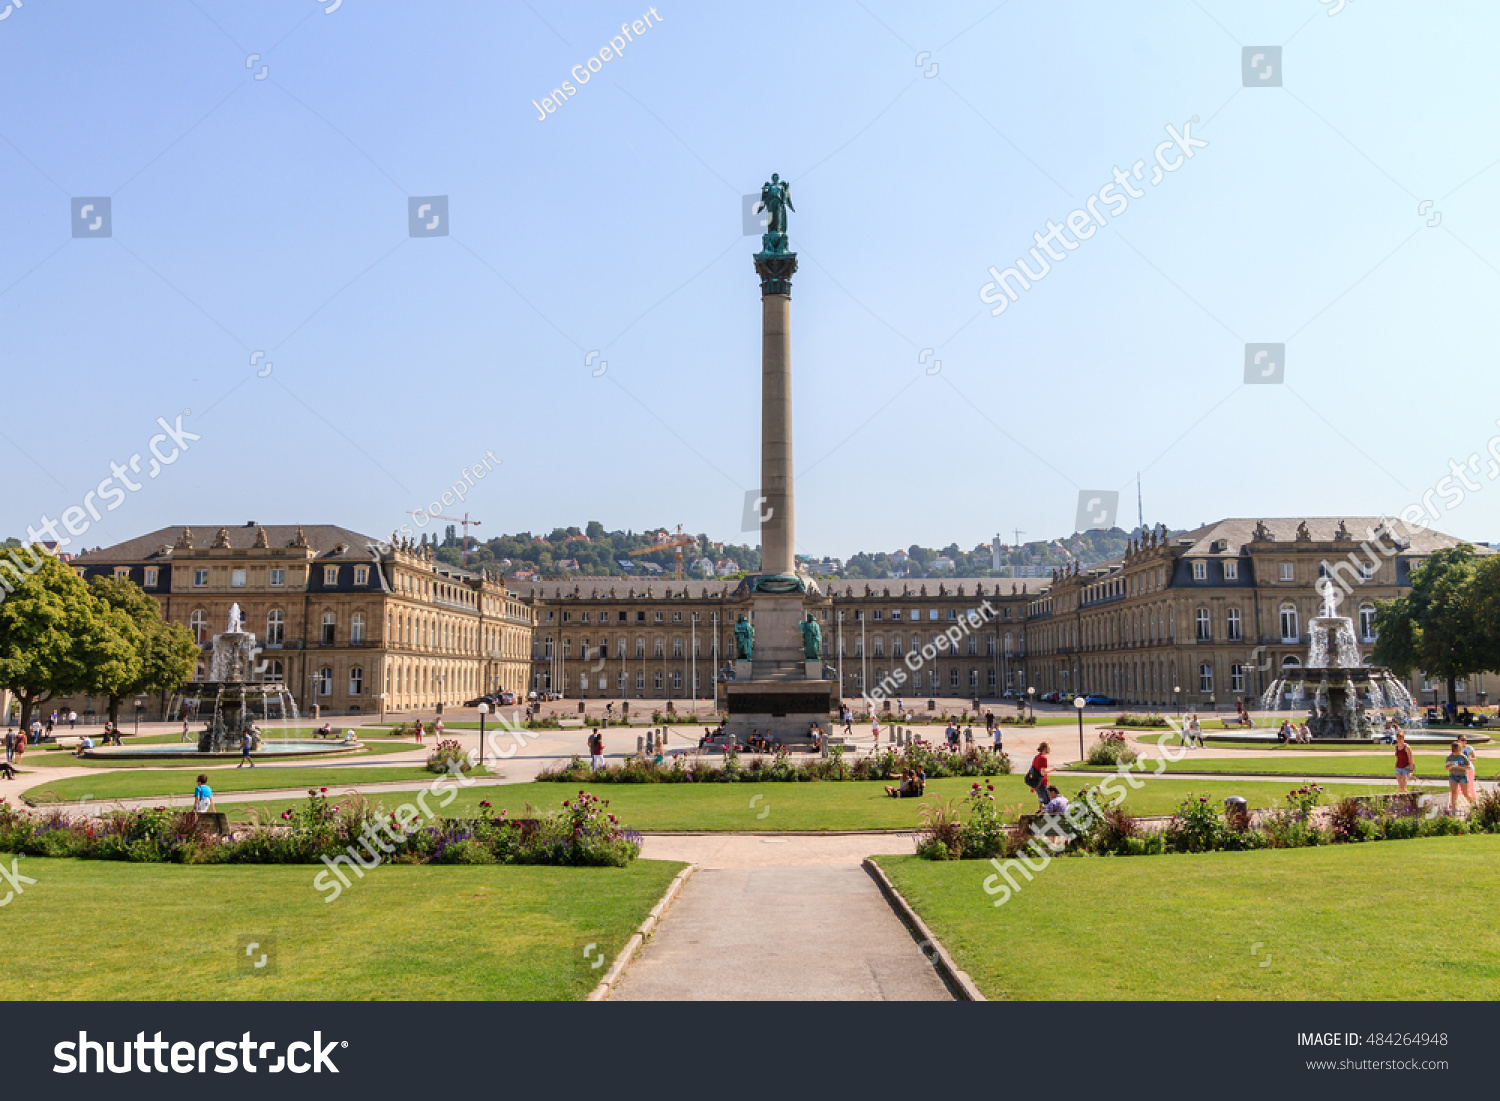 Stuttgart (Germany) Castle Square with the